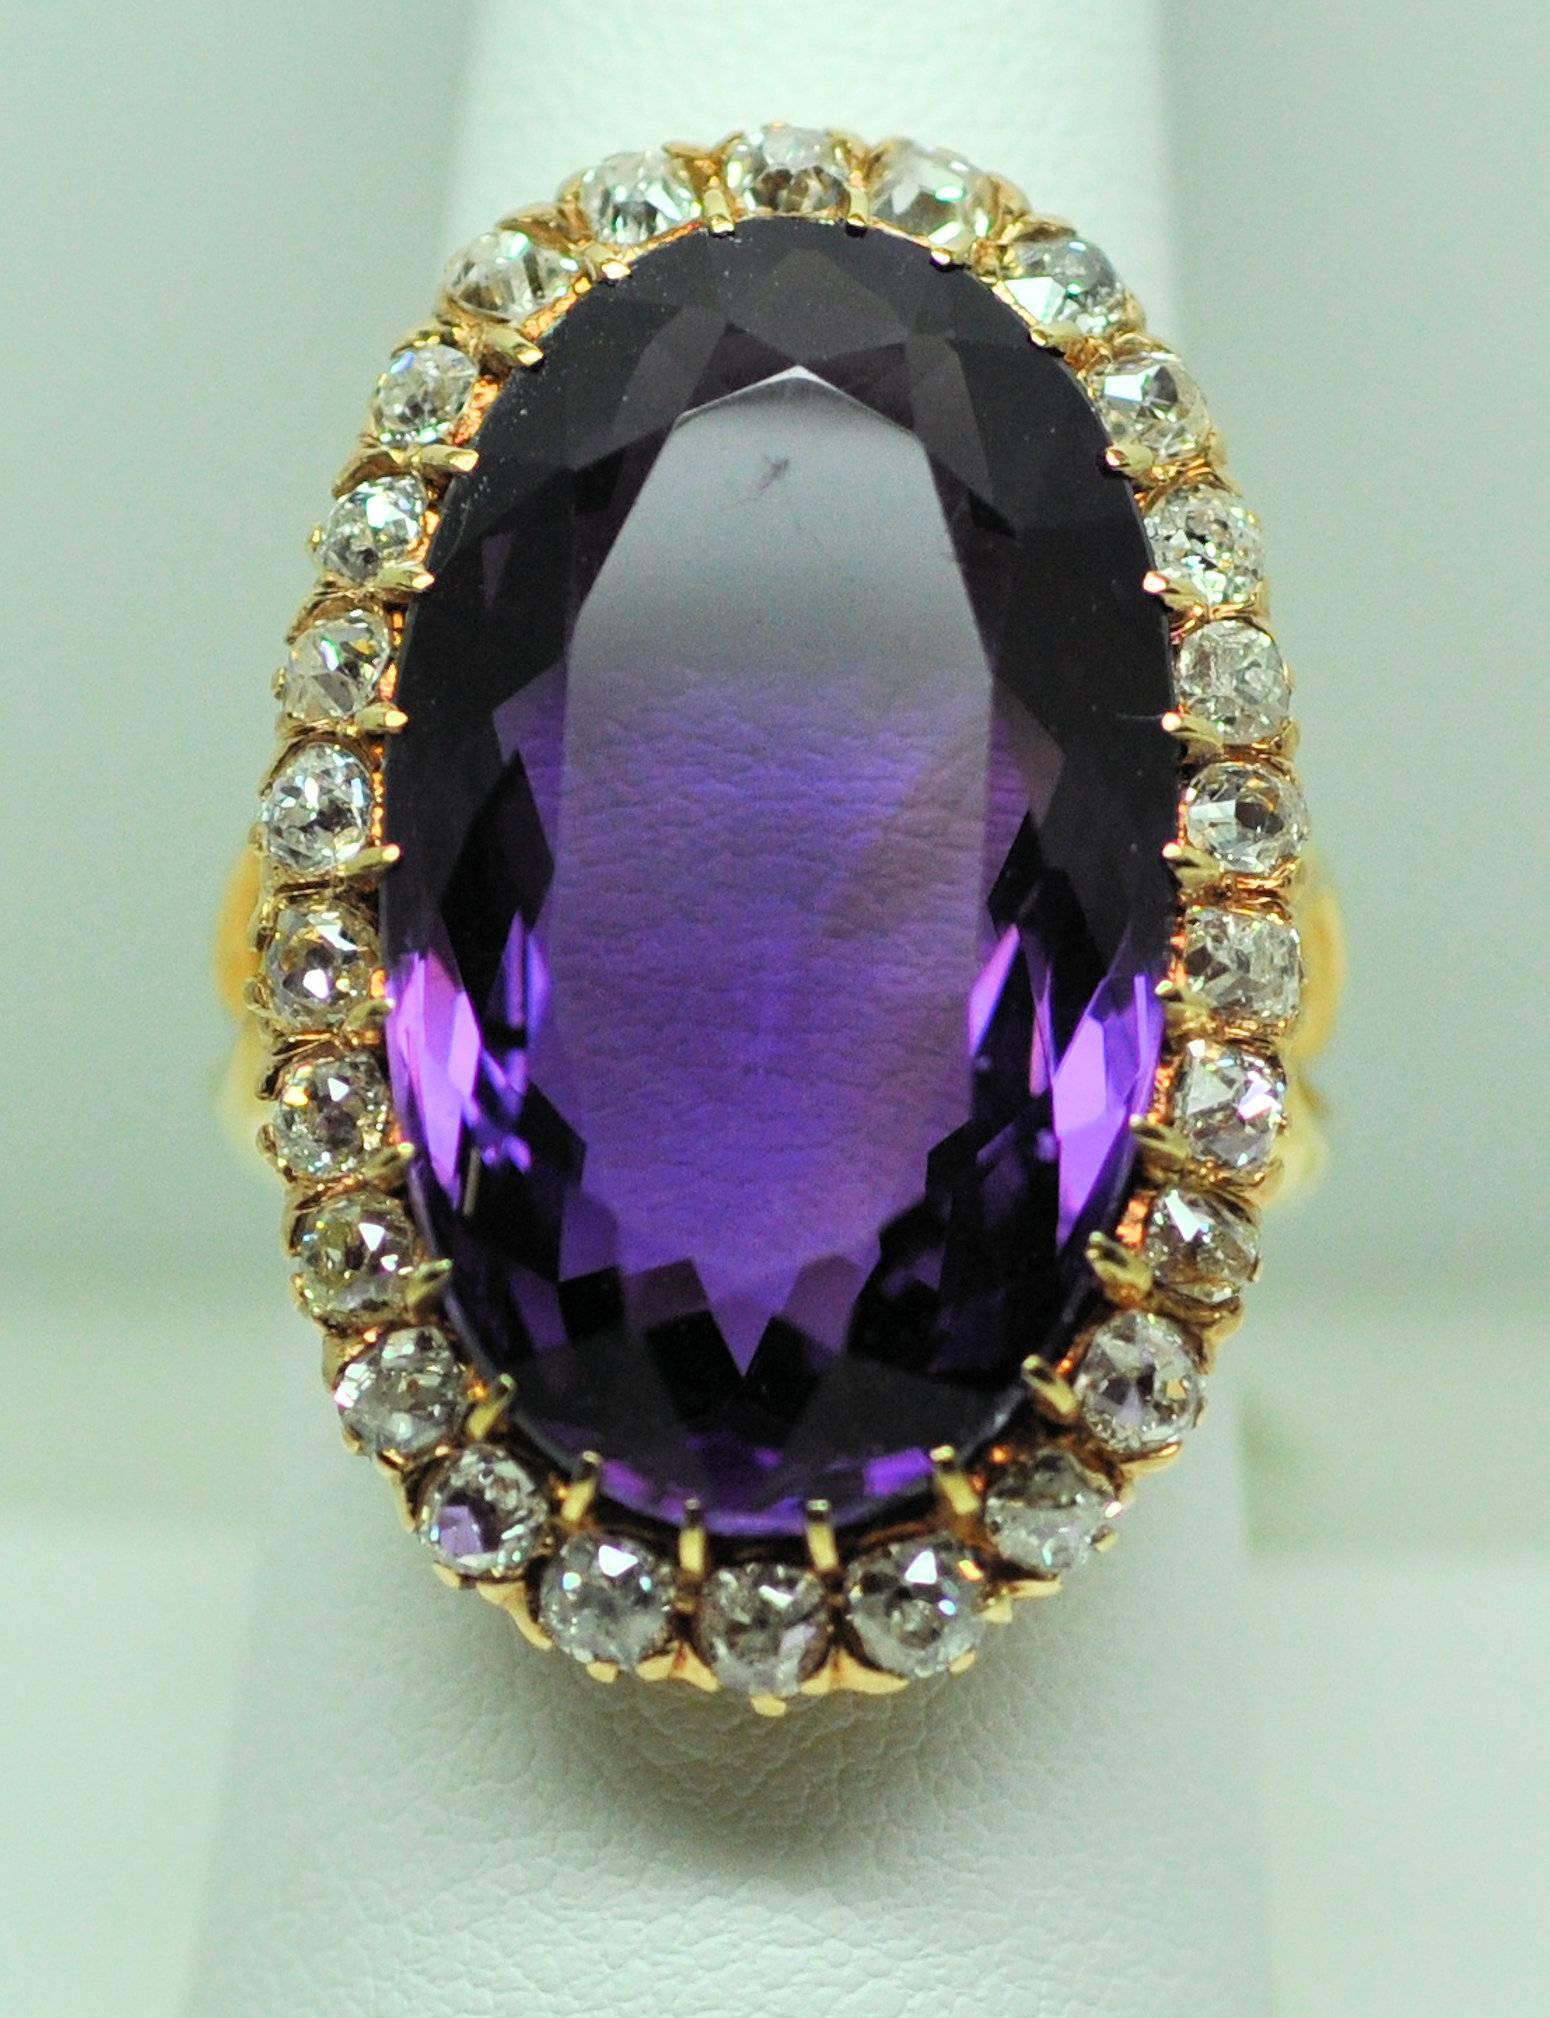 14K rose gold antique ring set with large oval amethyst 22.50 ct. surrounded by Old Mine cut diamonds 2.60 ct. total weight of grade SI, I-J. 12.8dwt. Beautifully engraved under bezel. 